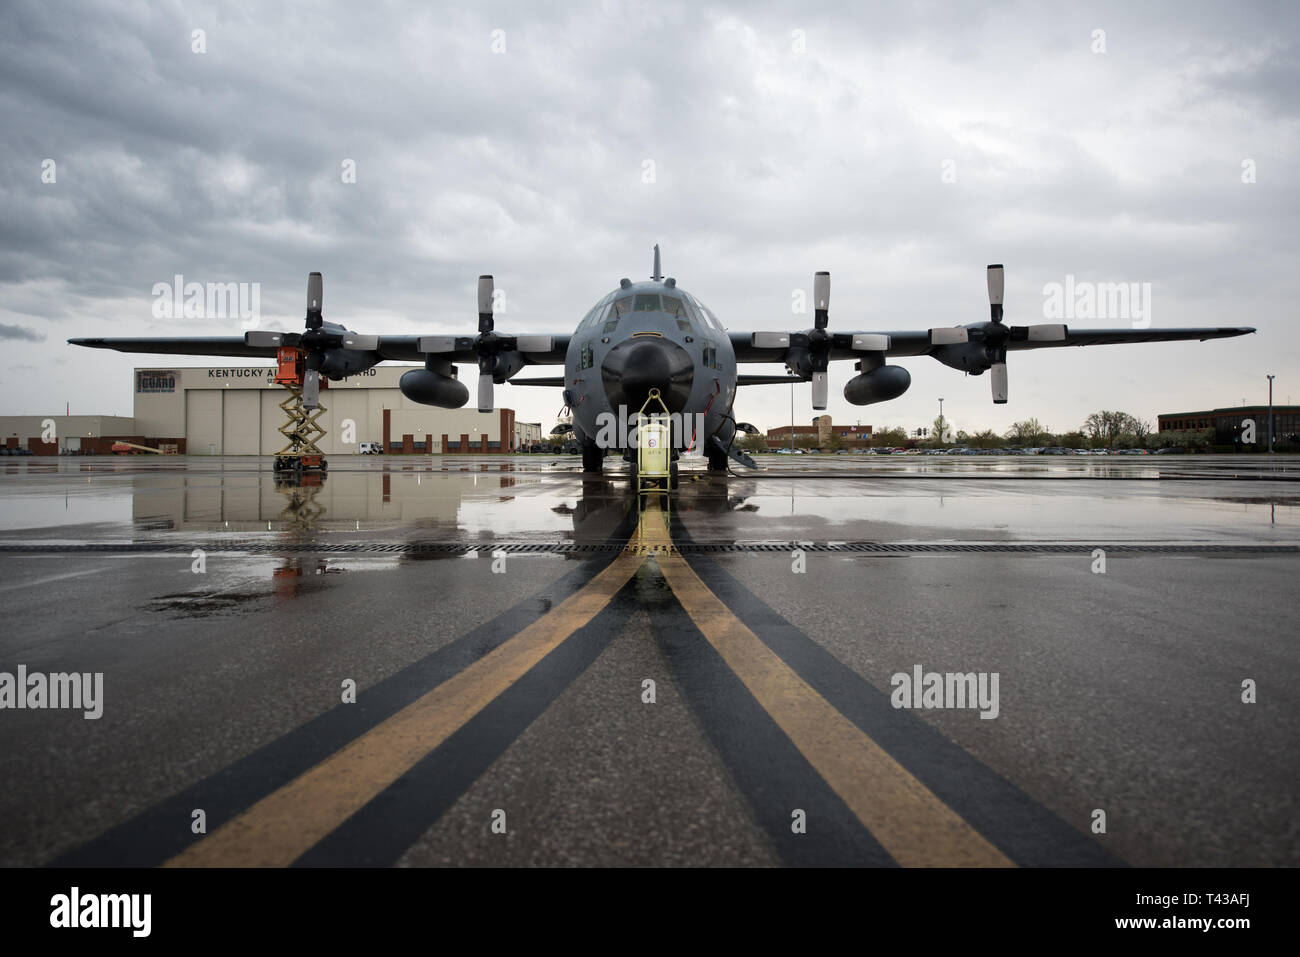 A 123rd Airlift Wing C-130 Hercules sits on the ramp at the Kentucky Air National Guard Base in Louisville, Ky., April 12, 2019, prior to this weekend’s Thunder Over Louisville air show. The Kentucky Air Guard has served as the base of operations for military aircraft appearing in the event for the past 29 years. (U.S. Air National Guard photo by Phil Speck) Stock Photo